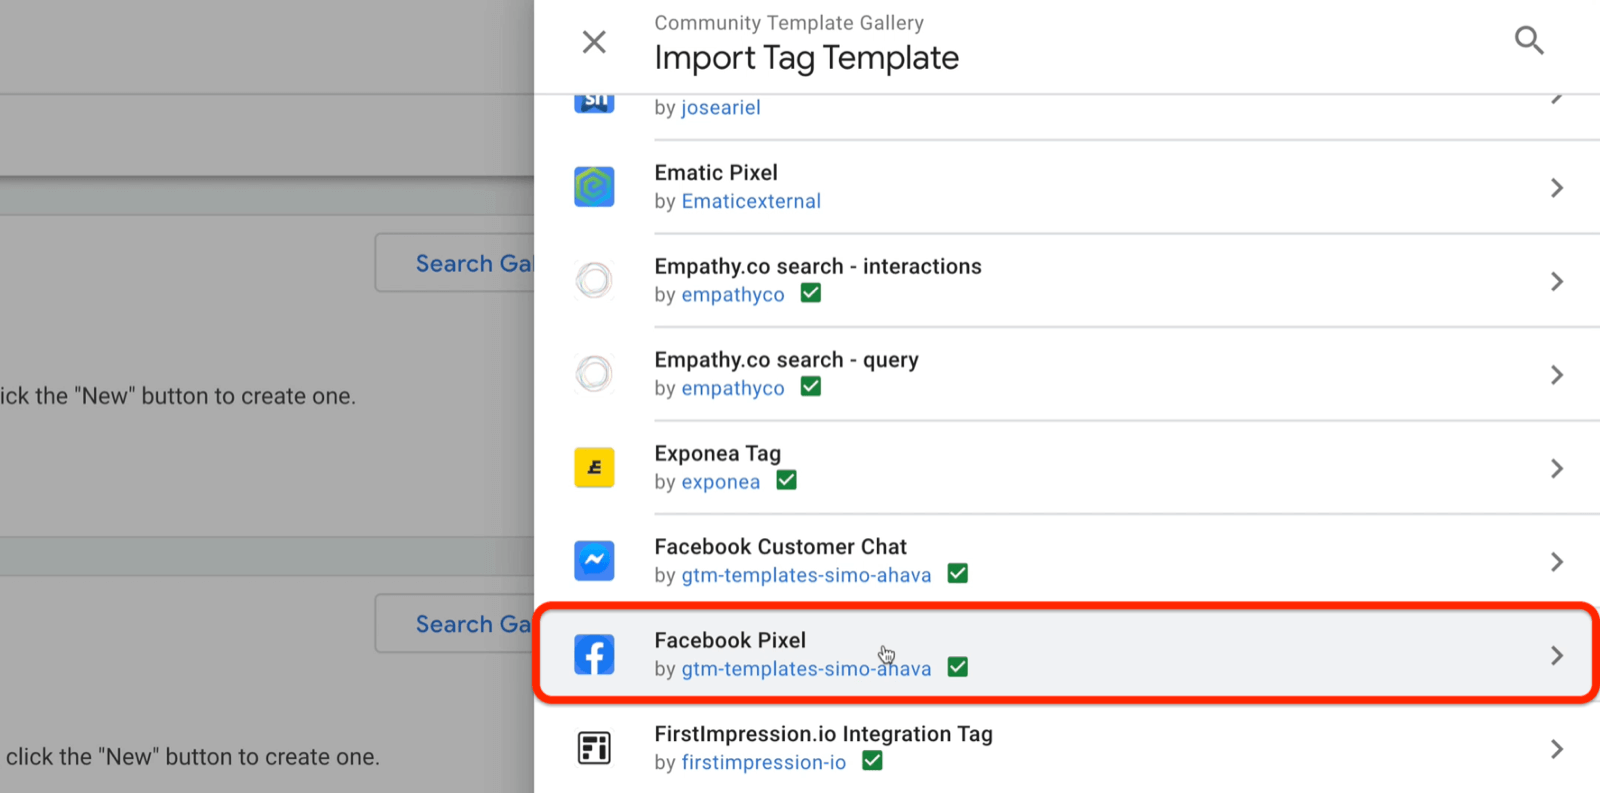 google tag manager community template gallery import tag template menu with example templates of ematic pixel, exponea tag, facebook customer chat, among others with facebook pixel highlighted